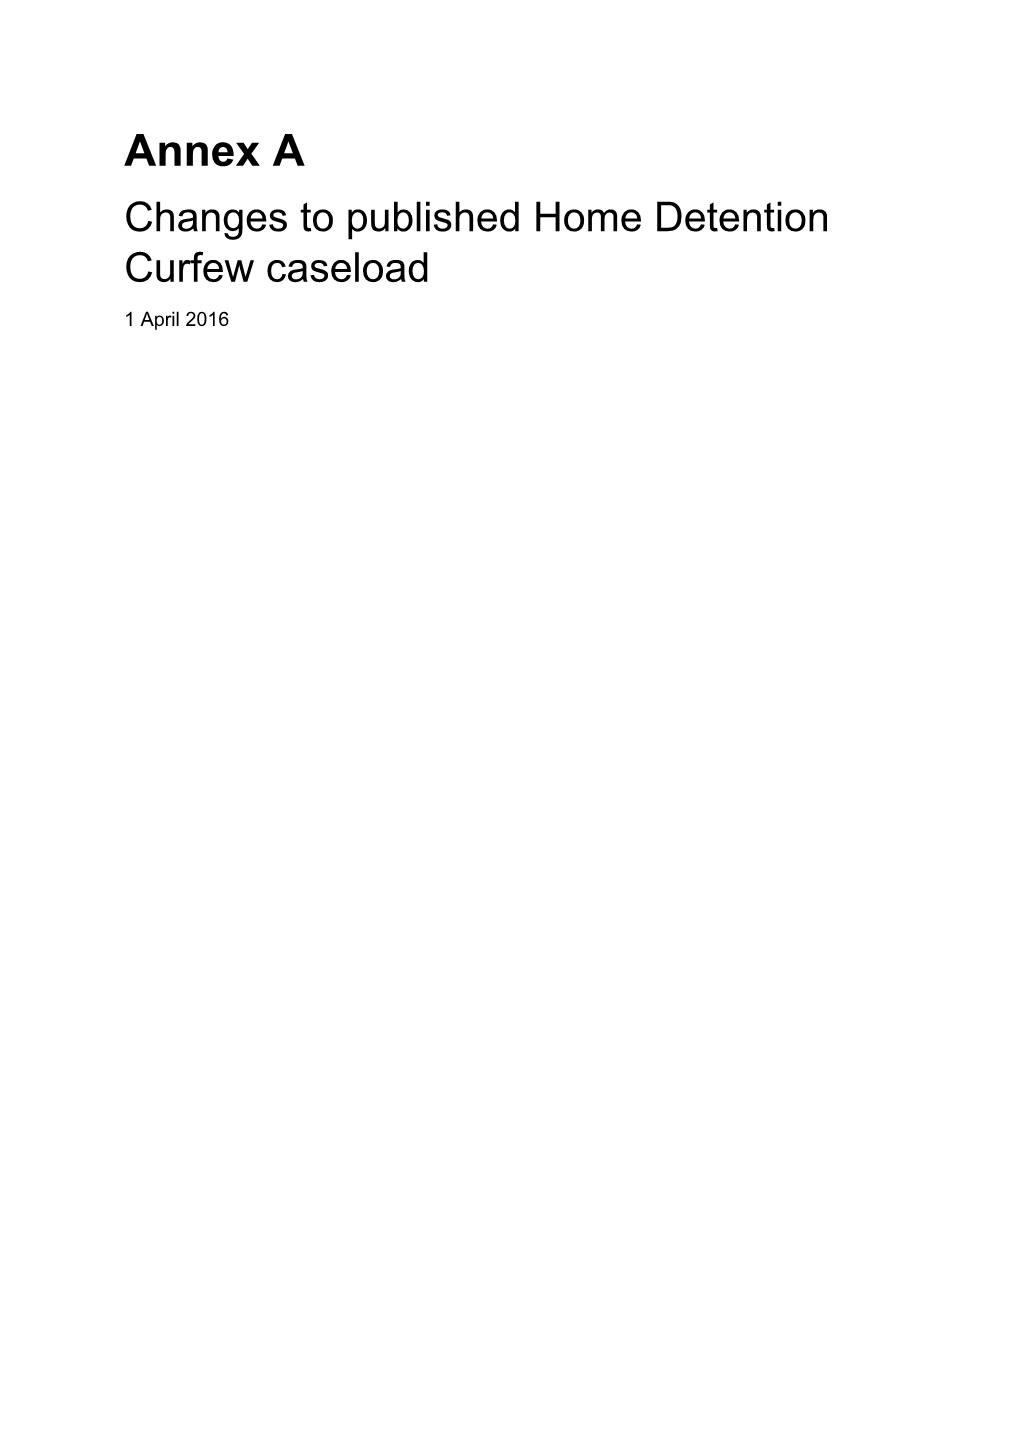 Annex A: Changes to Published Home Detention Curfew Caseload